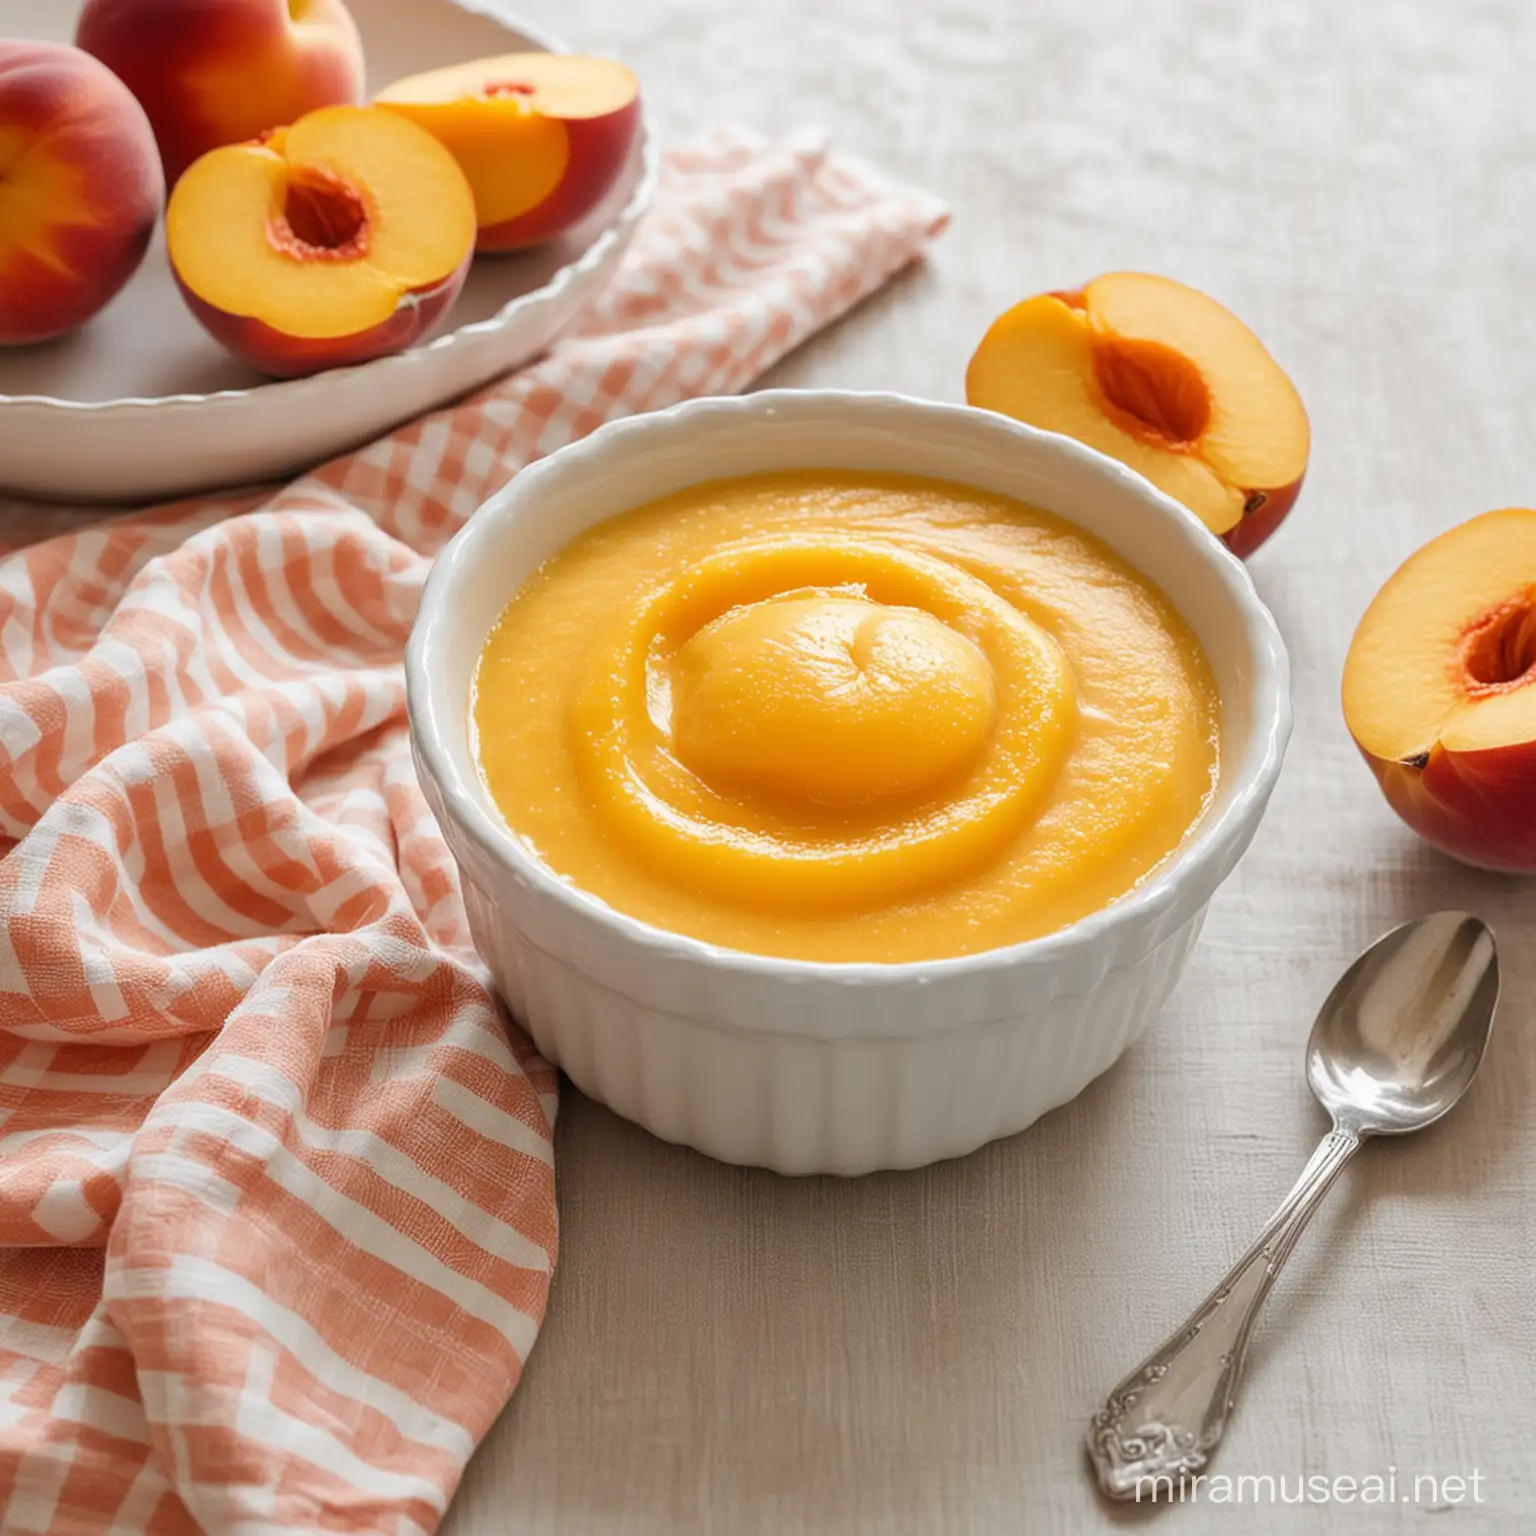 Peach Puree in a bowl on a table with a nice table cloth